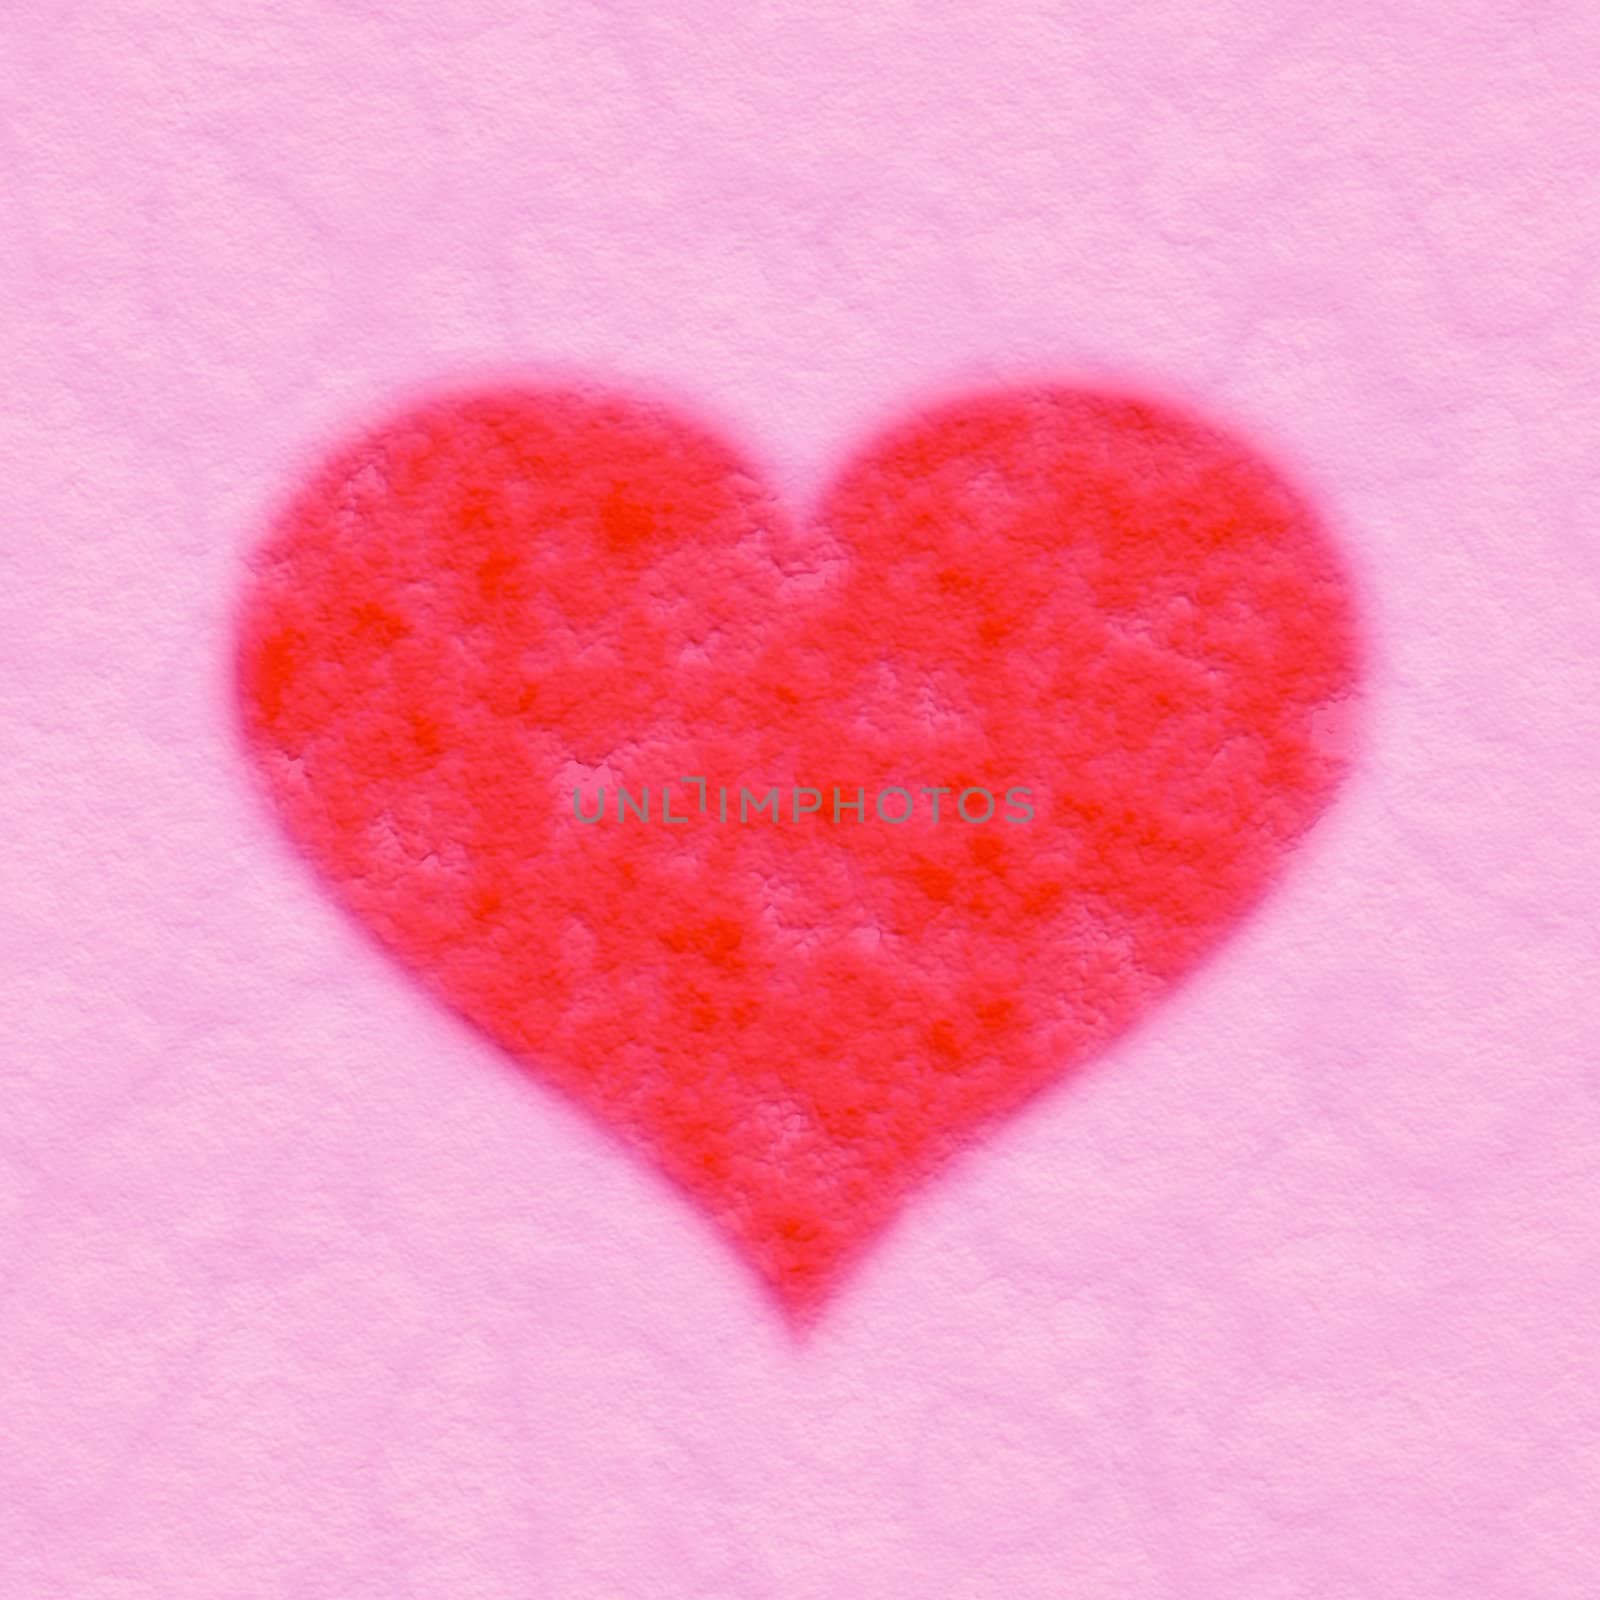 red fabric heart on pink textile background 